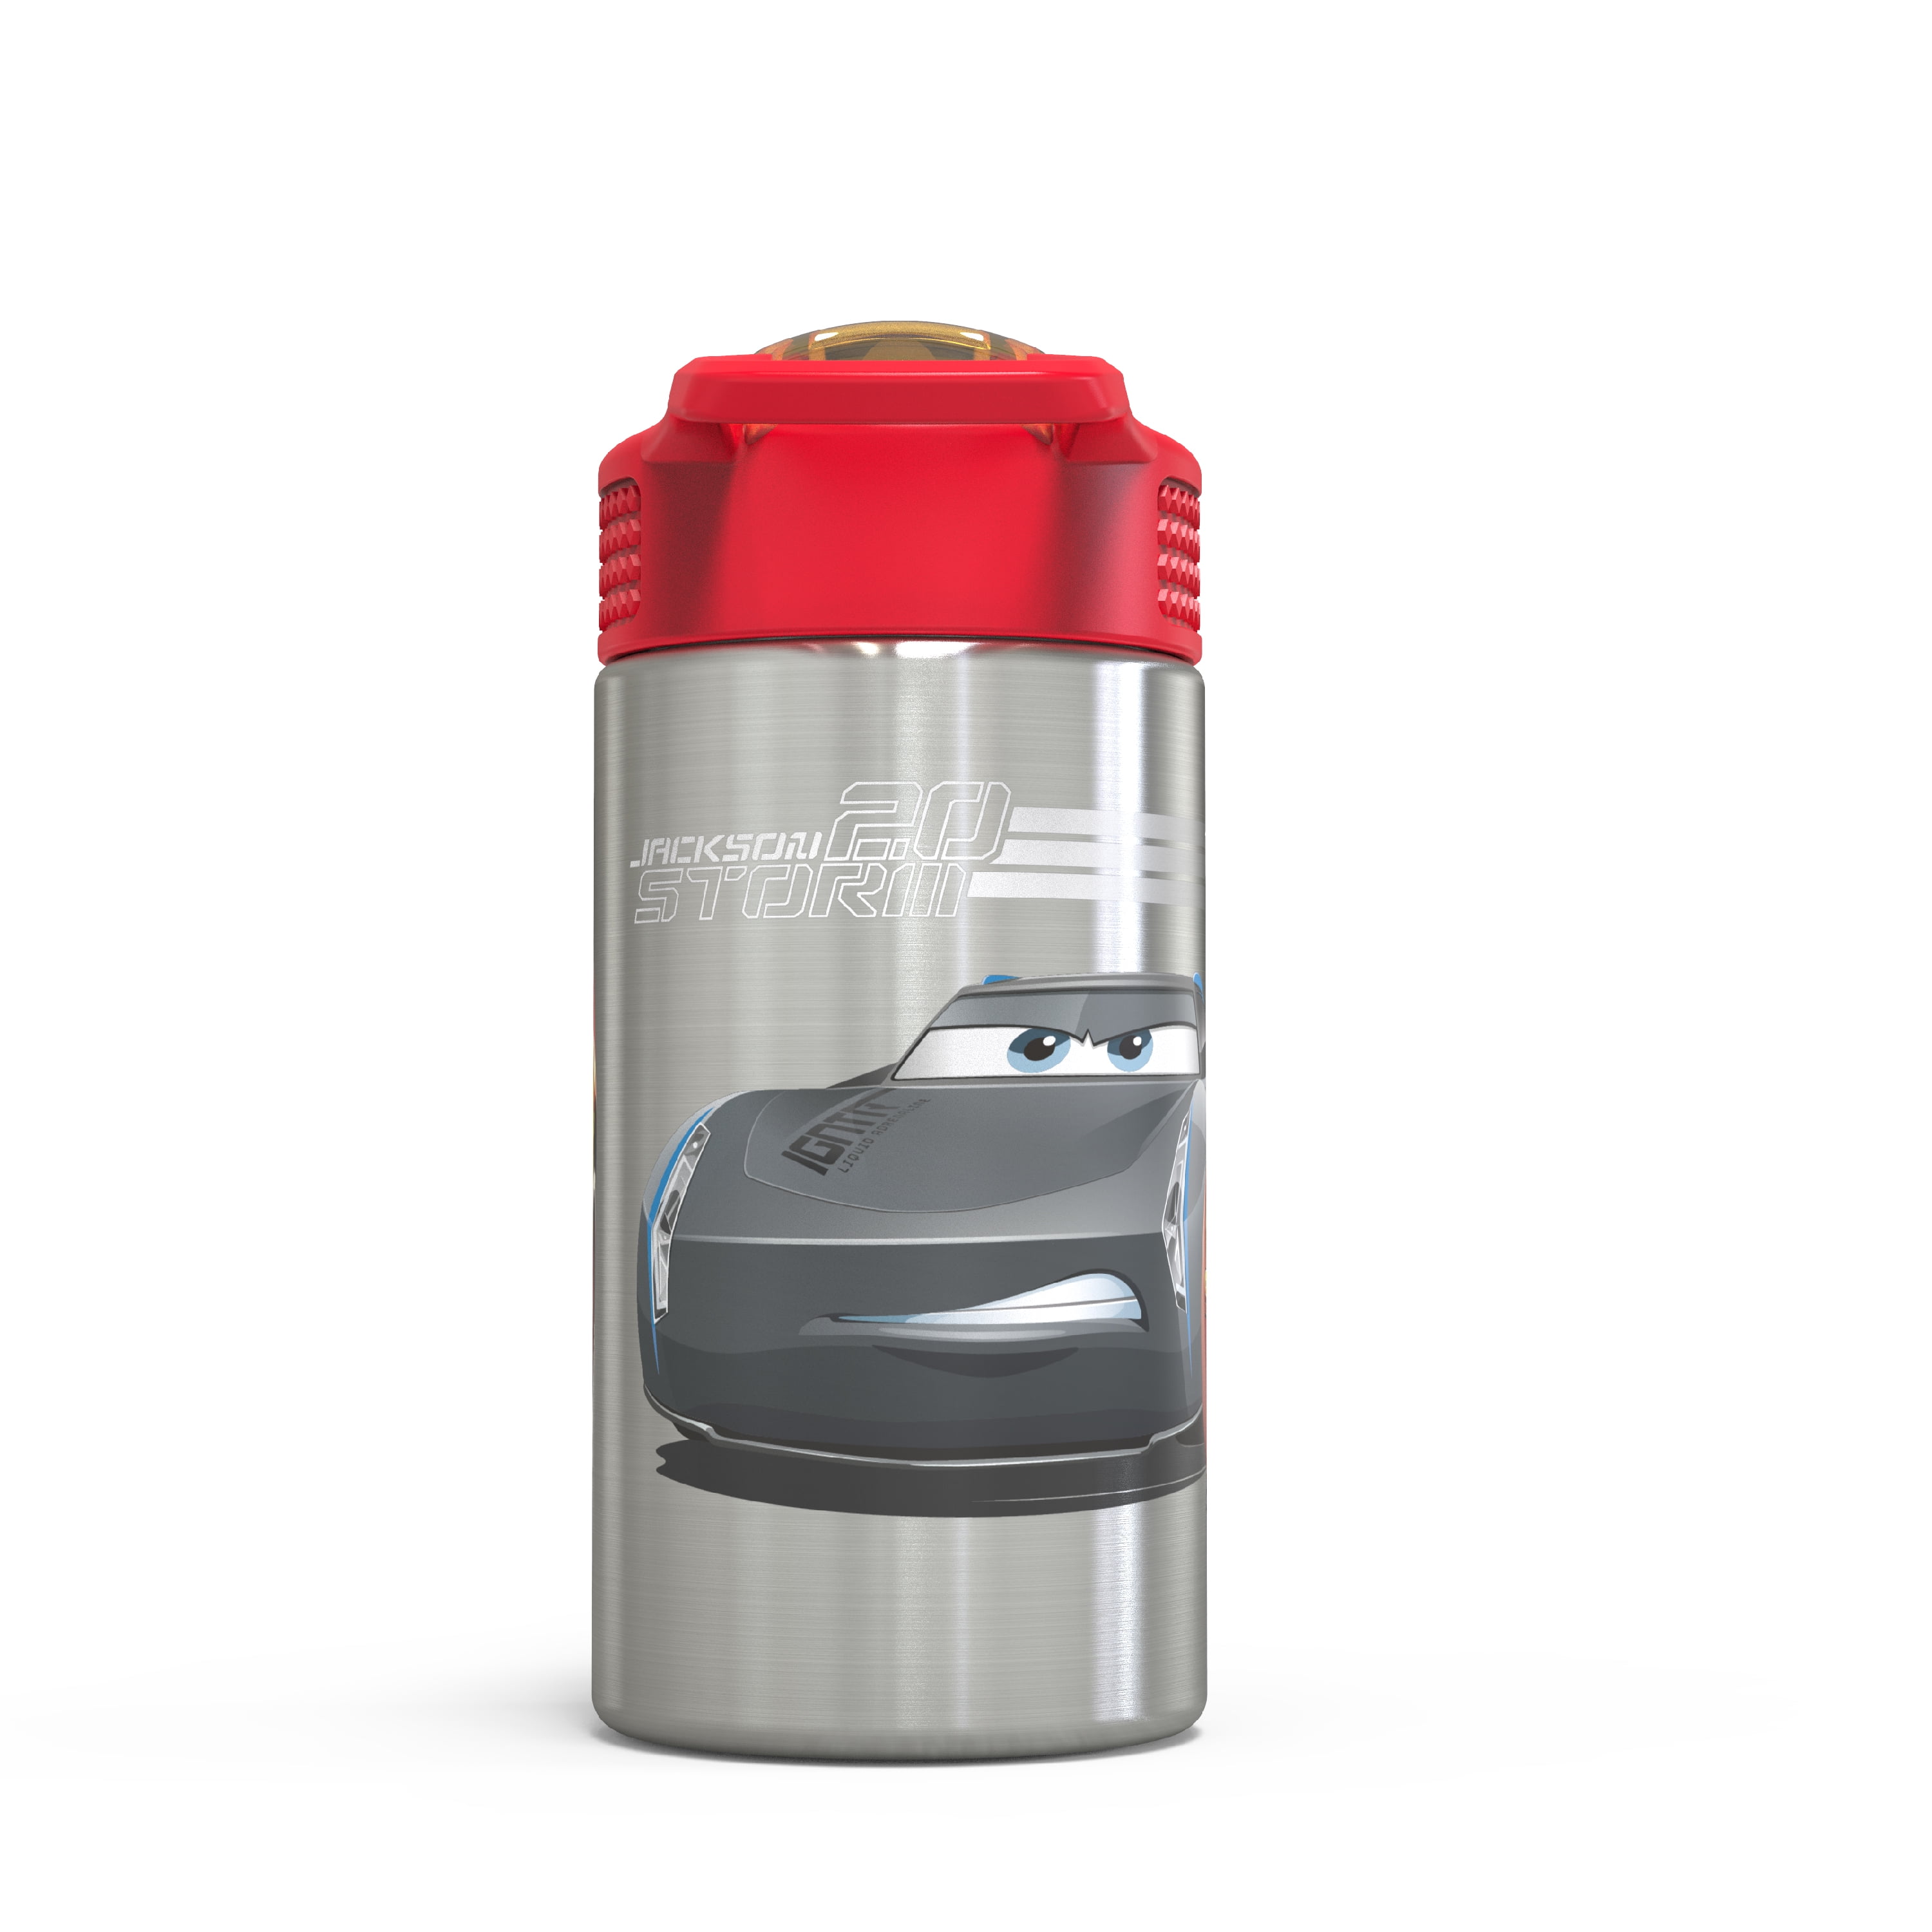 The War on Cars Water Bottle